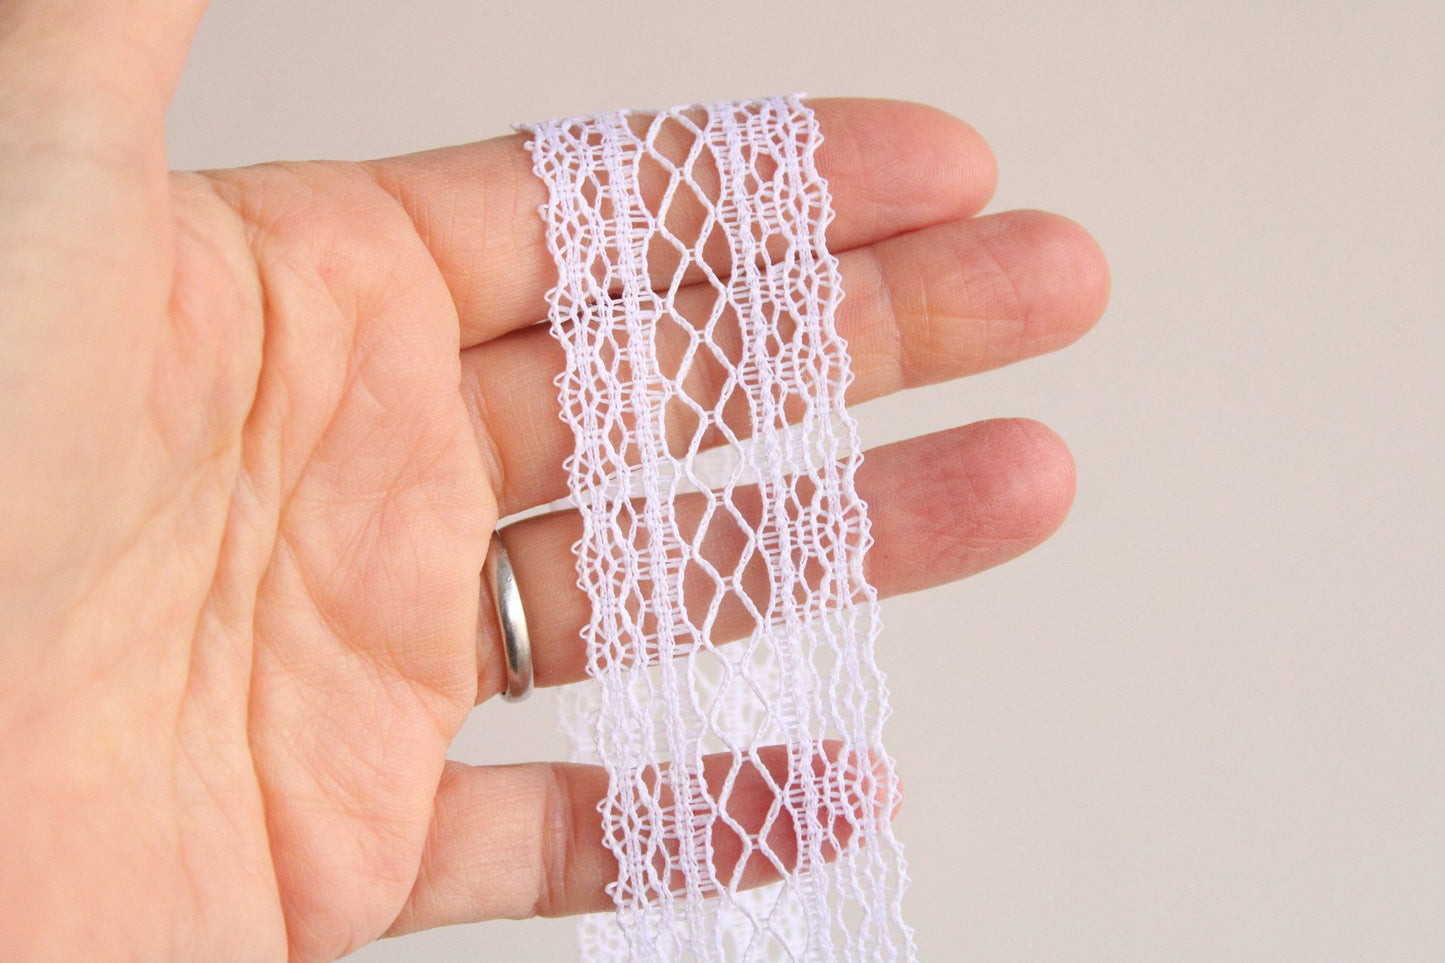 Vintage White Lace Trim With A Lattice Pattern, 1.25" Wide 2 Yards